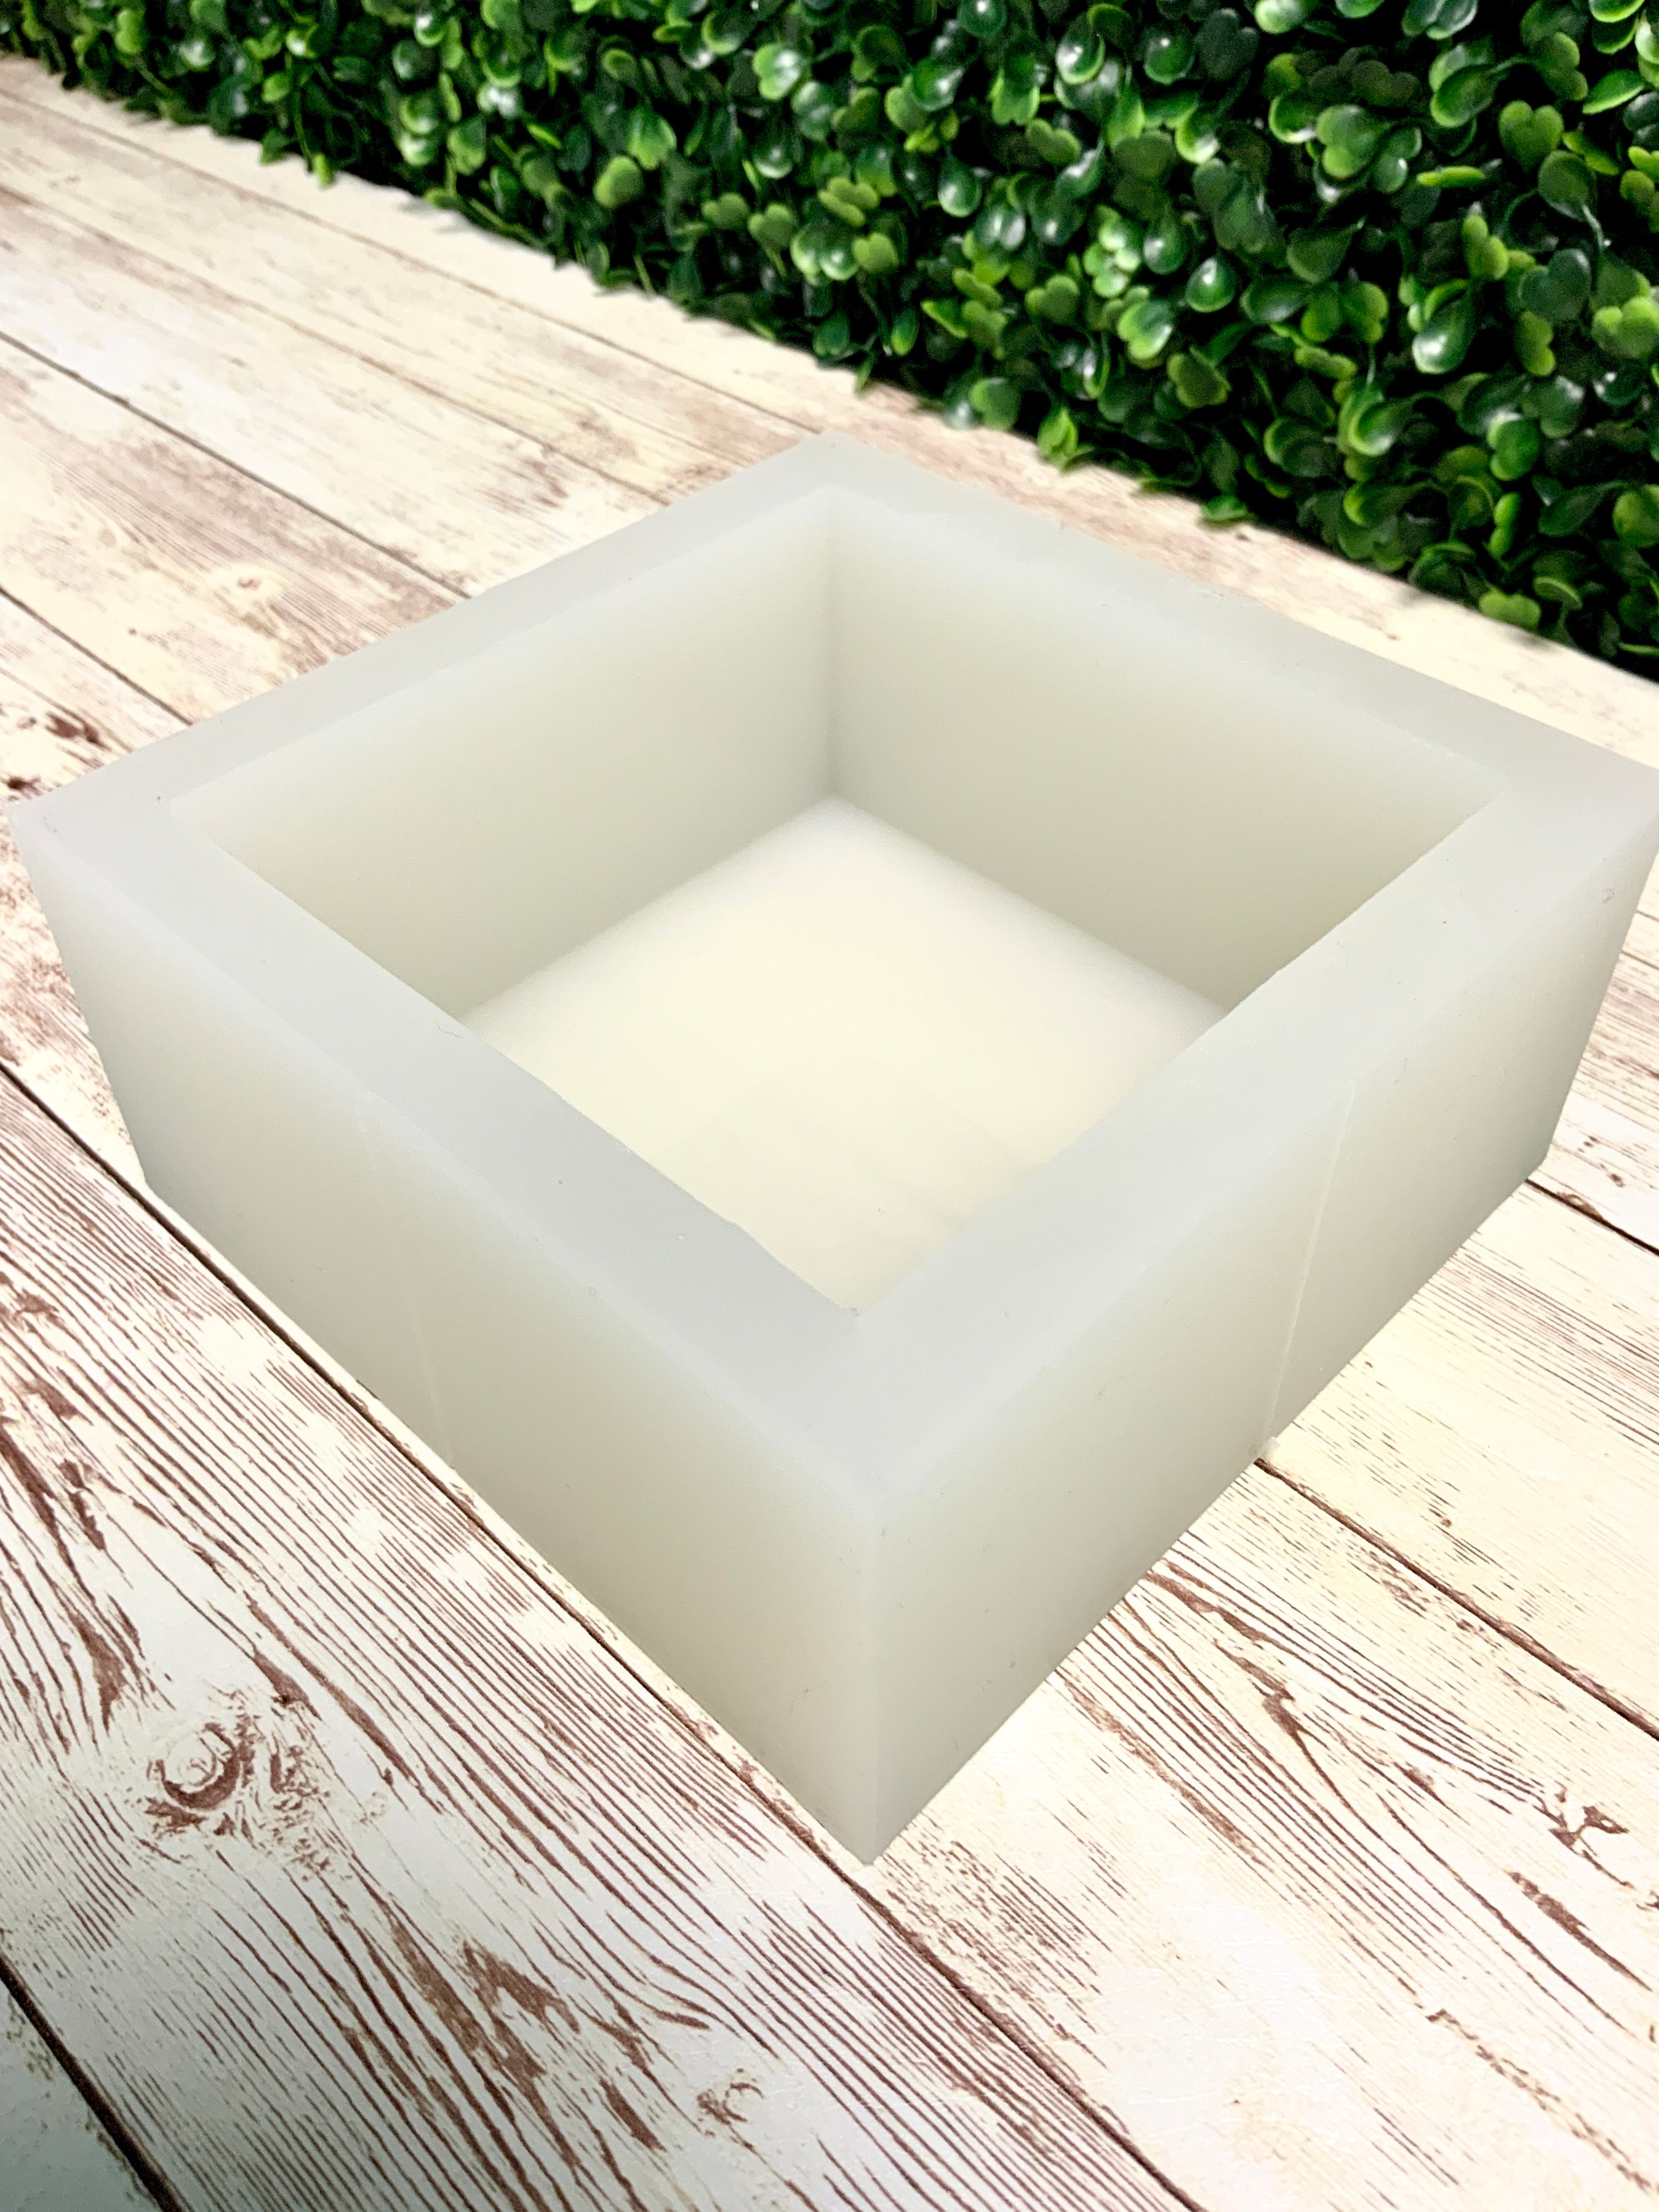 Square Silicone Mold, 4x4x2, ULTRA Quality